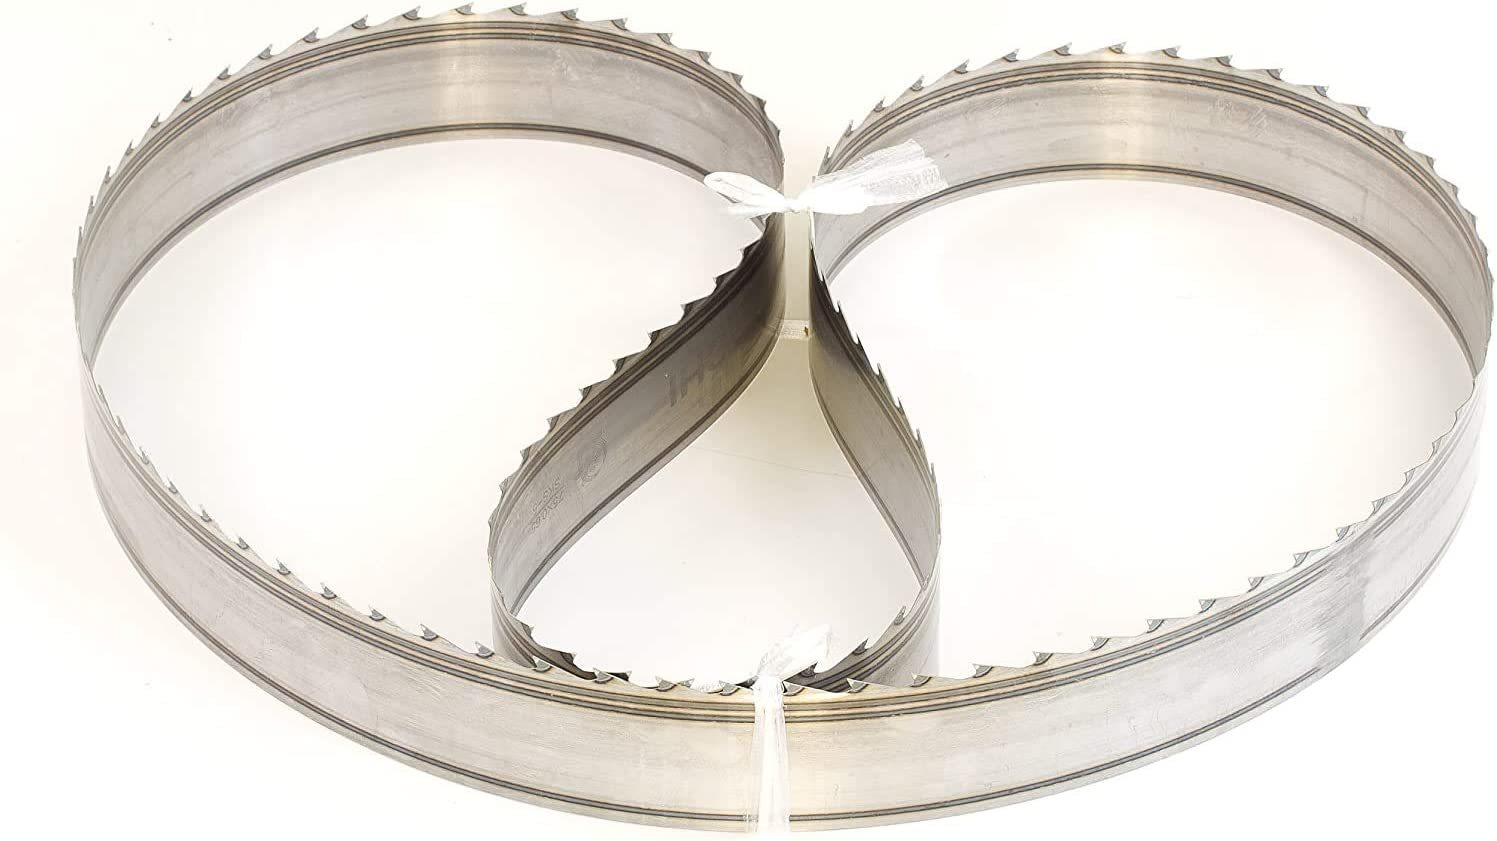 Metabo HPT Band Saw Blade, 1-Tooth Per Inch, 3-Inch, Hardened Tip Wood, 939971M - $187.99